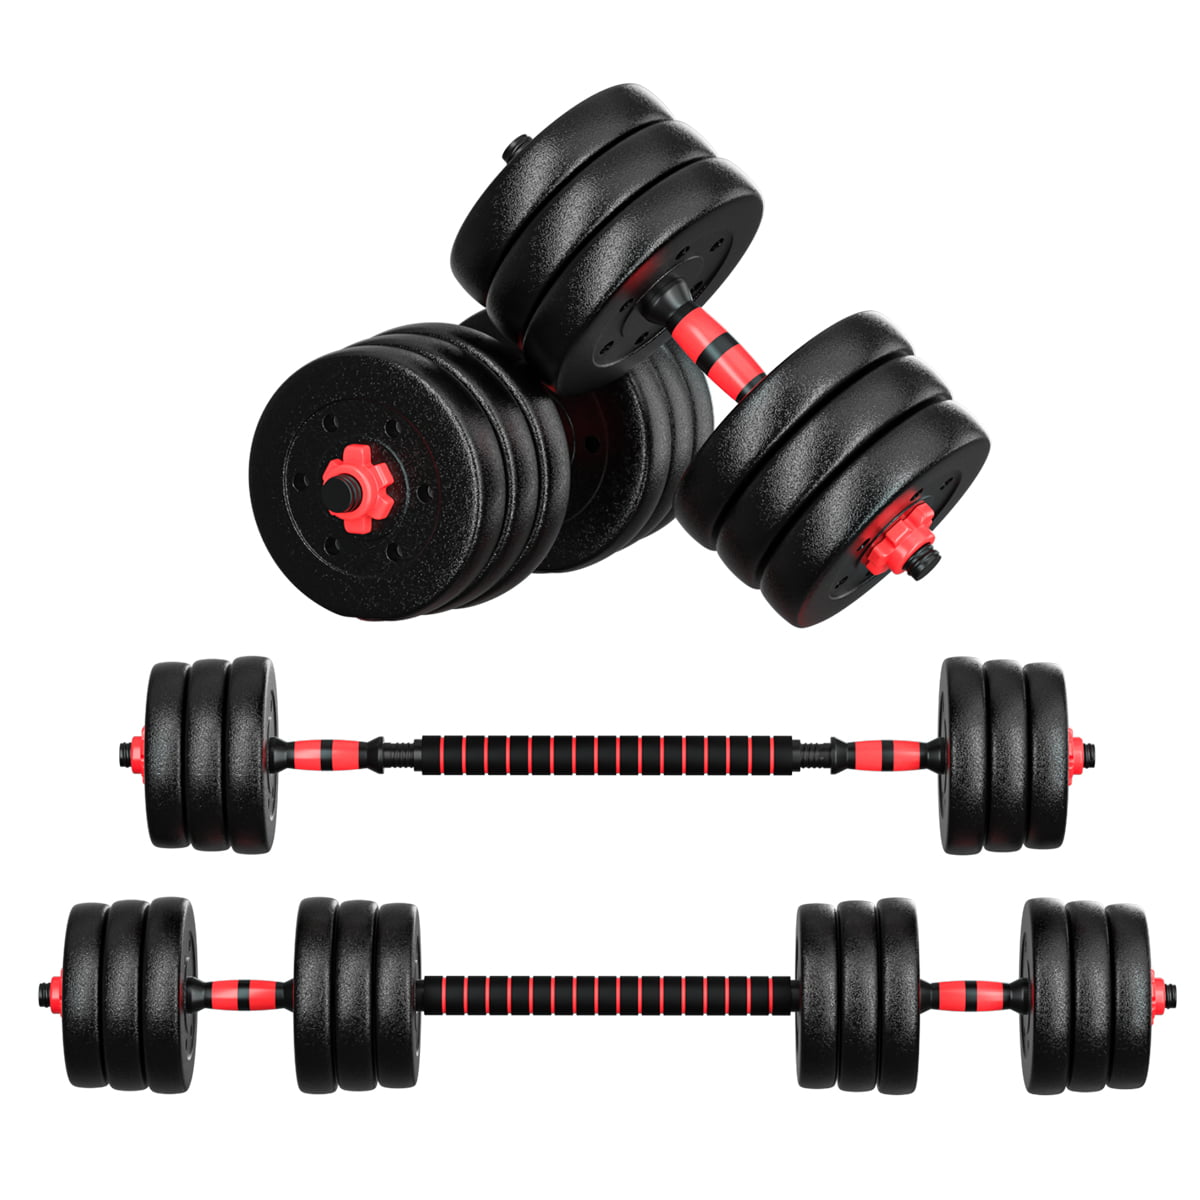 30KG/66LBS Dumbbell Set with Adjustable Plates Full Body Gym